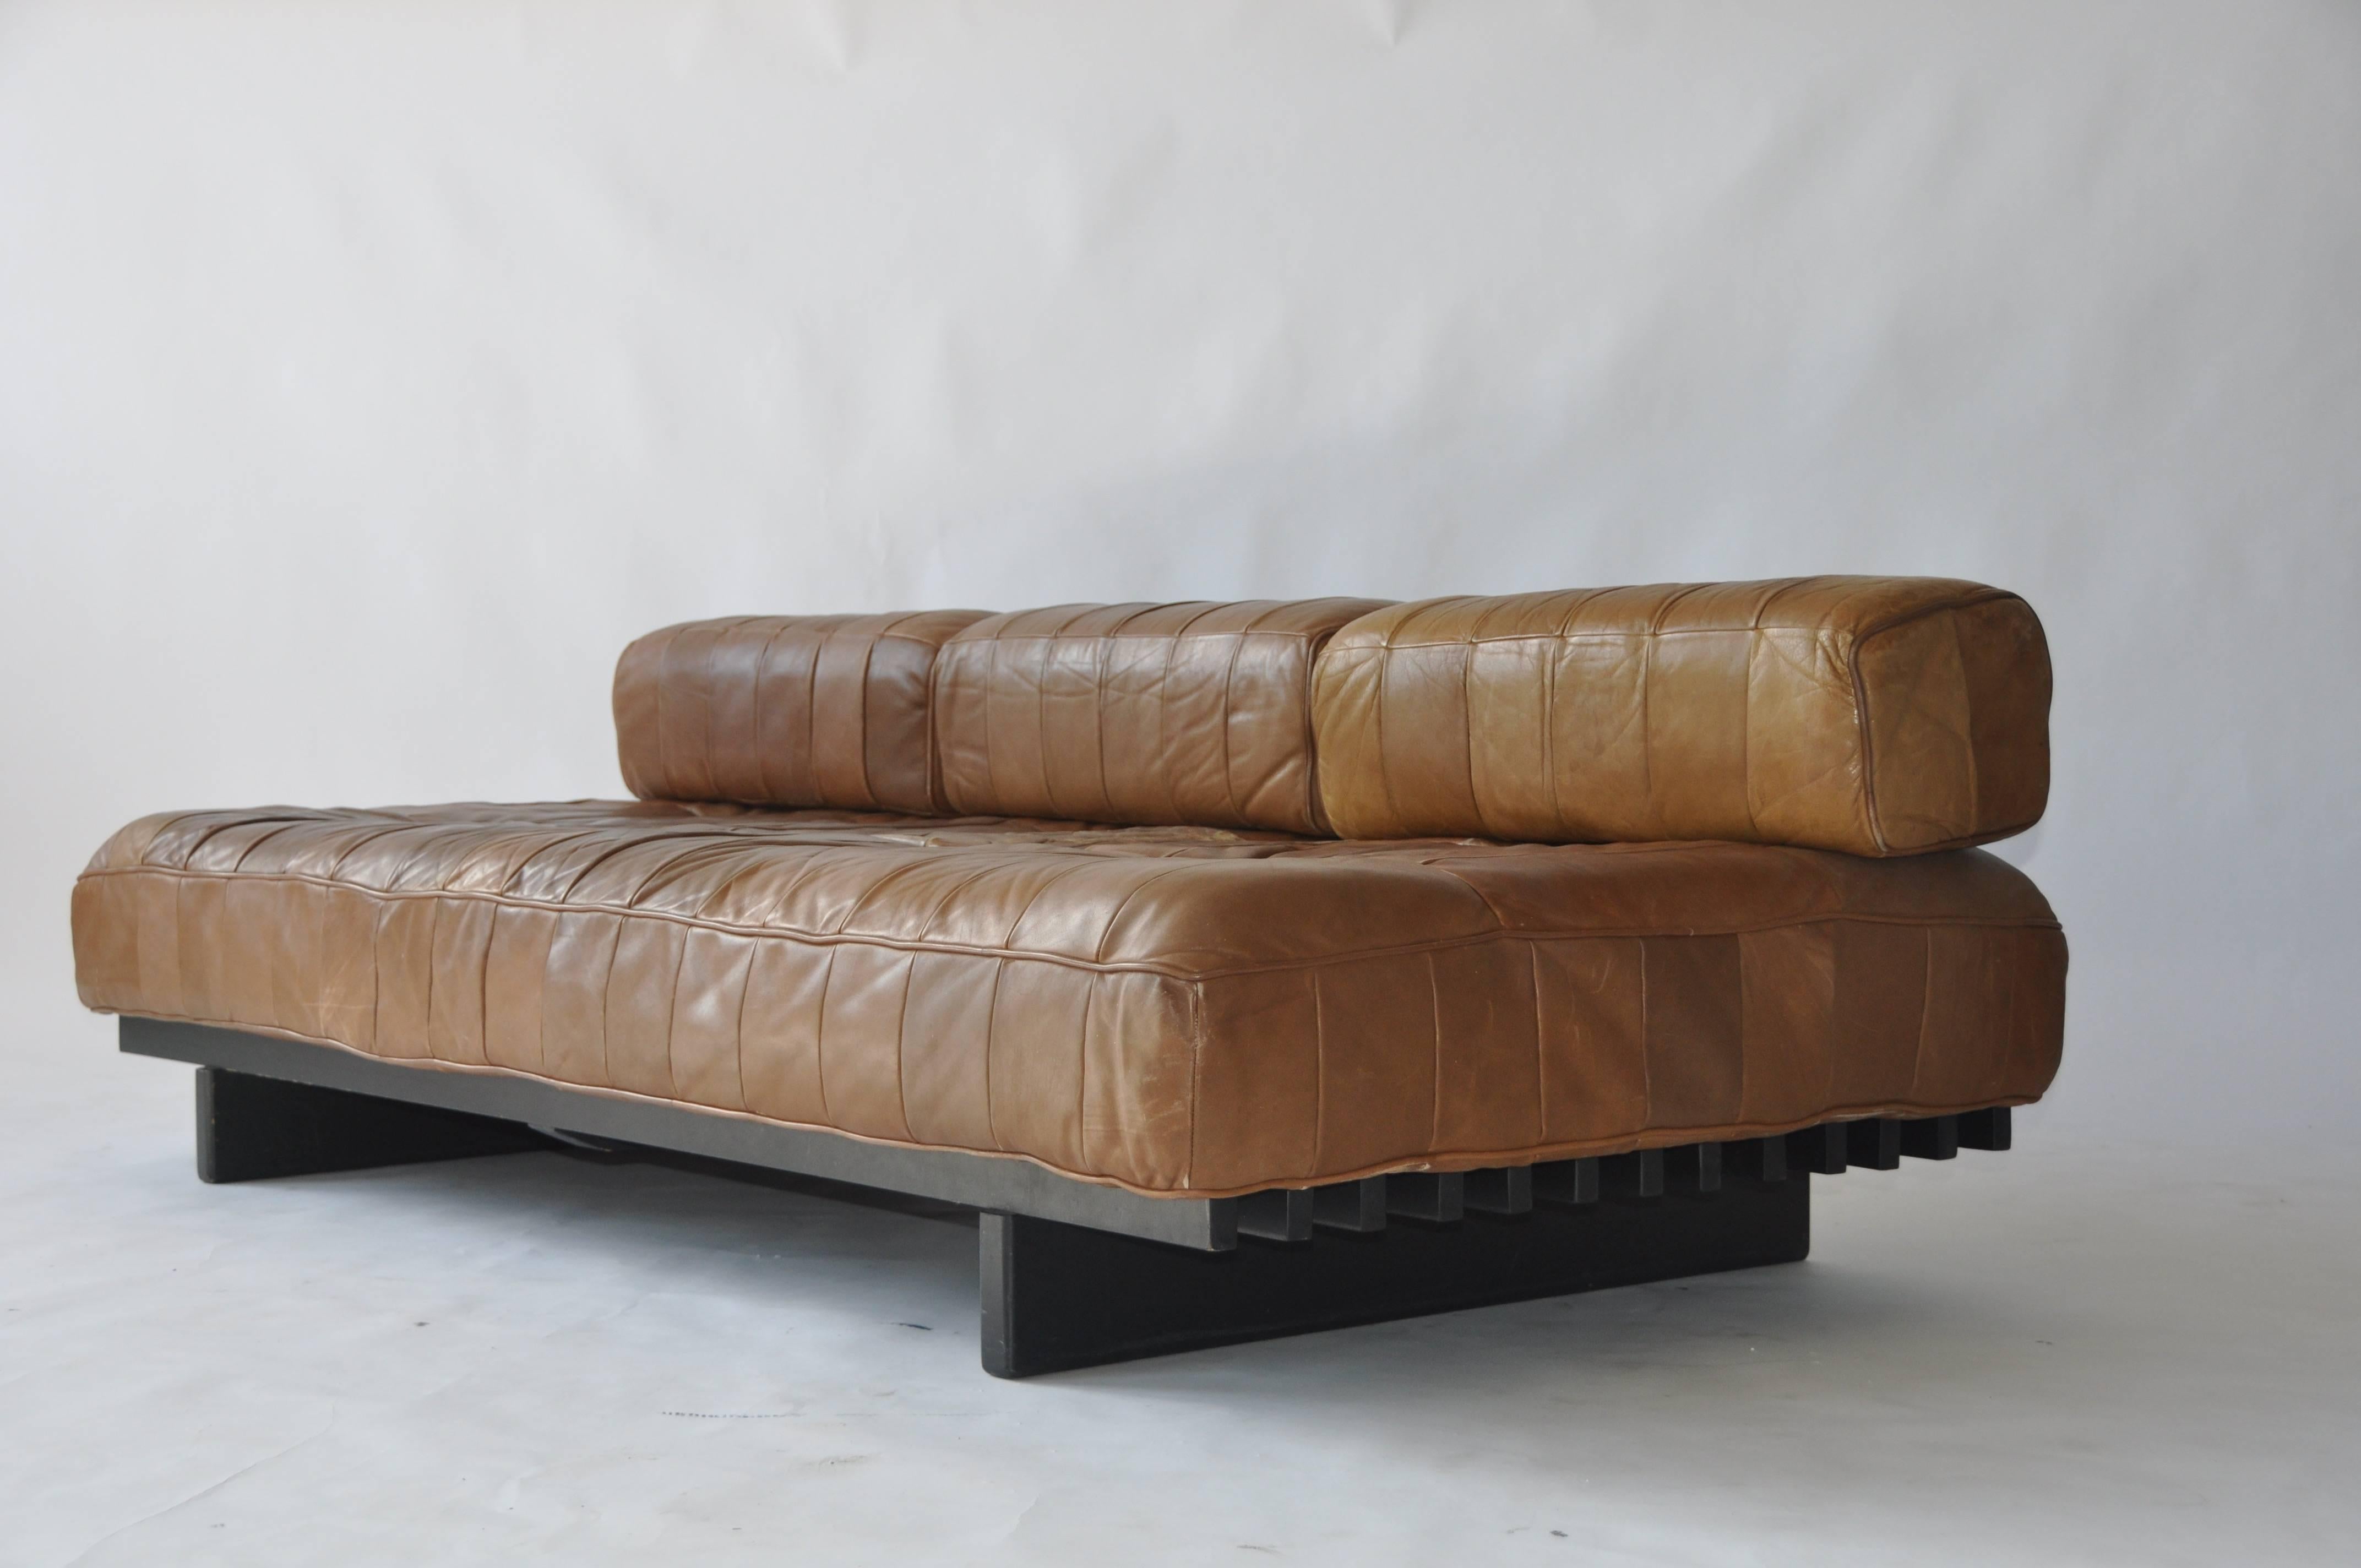 Vintage De Sede DS-80 daybed with original leather. Detachable backrest allows for versatile use. Leather is beautifully worn.